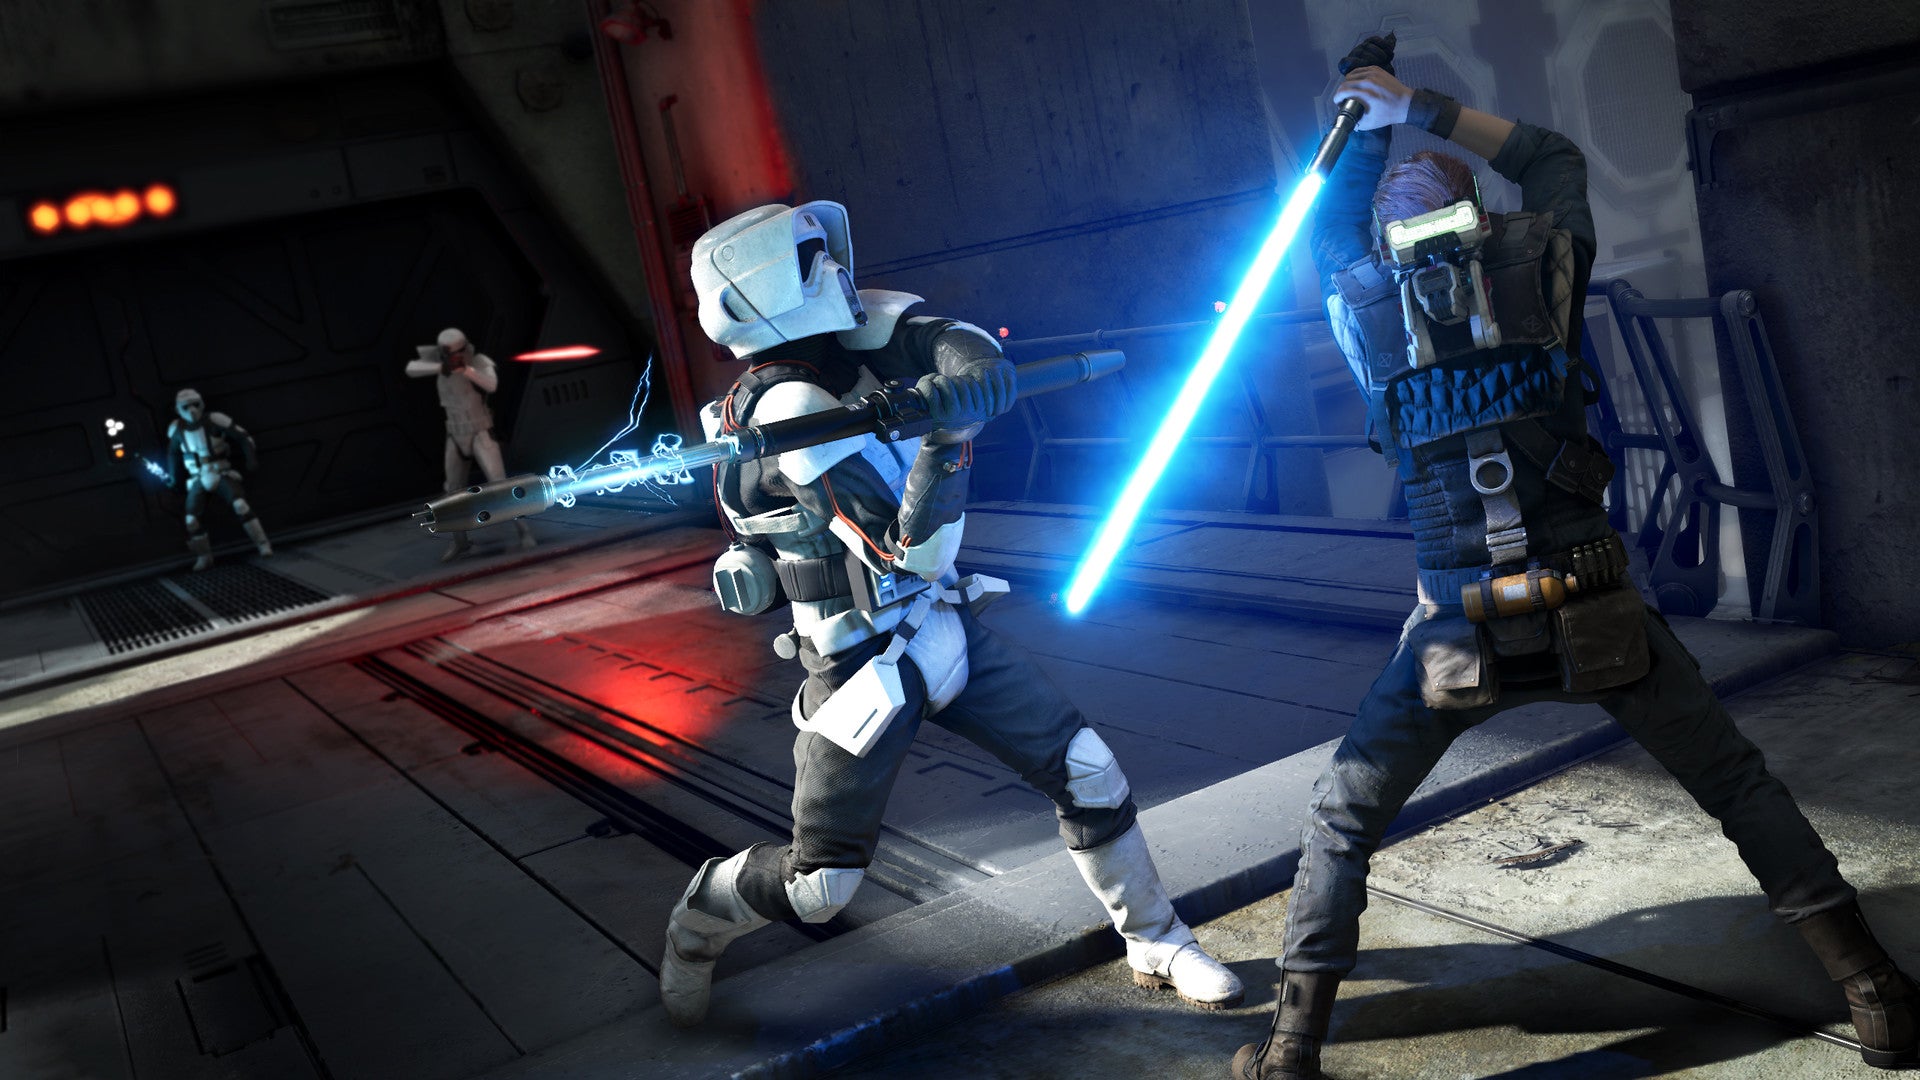 Cal Kestis from Star Wars: Jedi Fallen Order in a fight with a Stormtrooper; the trooper is armed with a baton charged with electricity